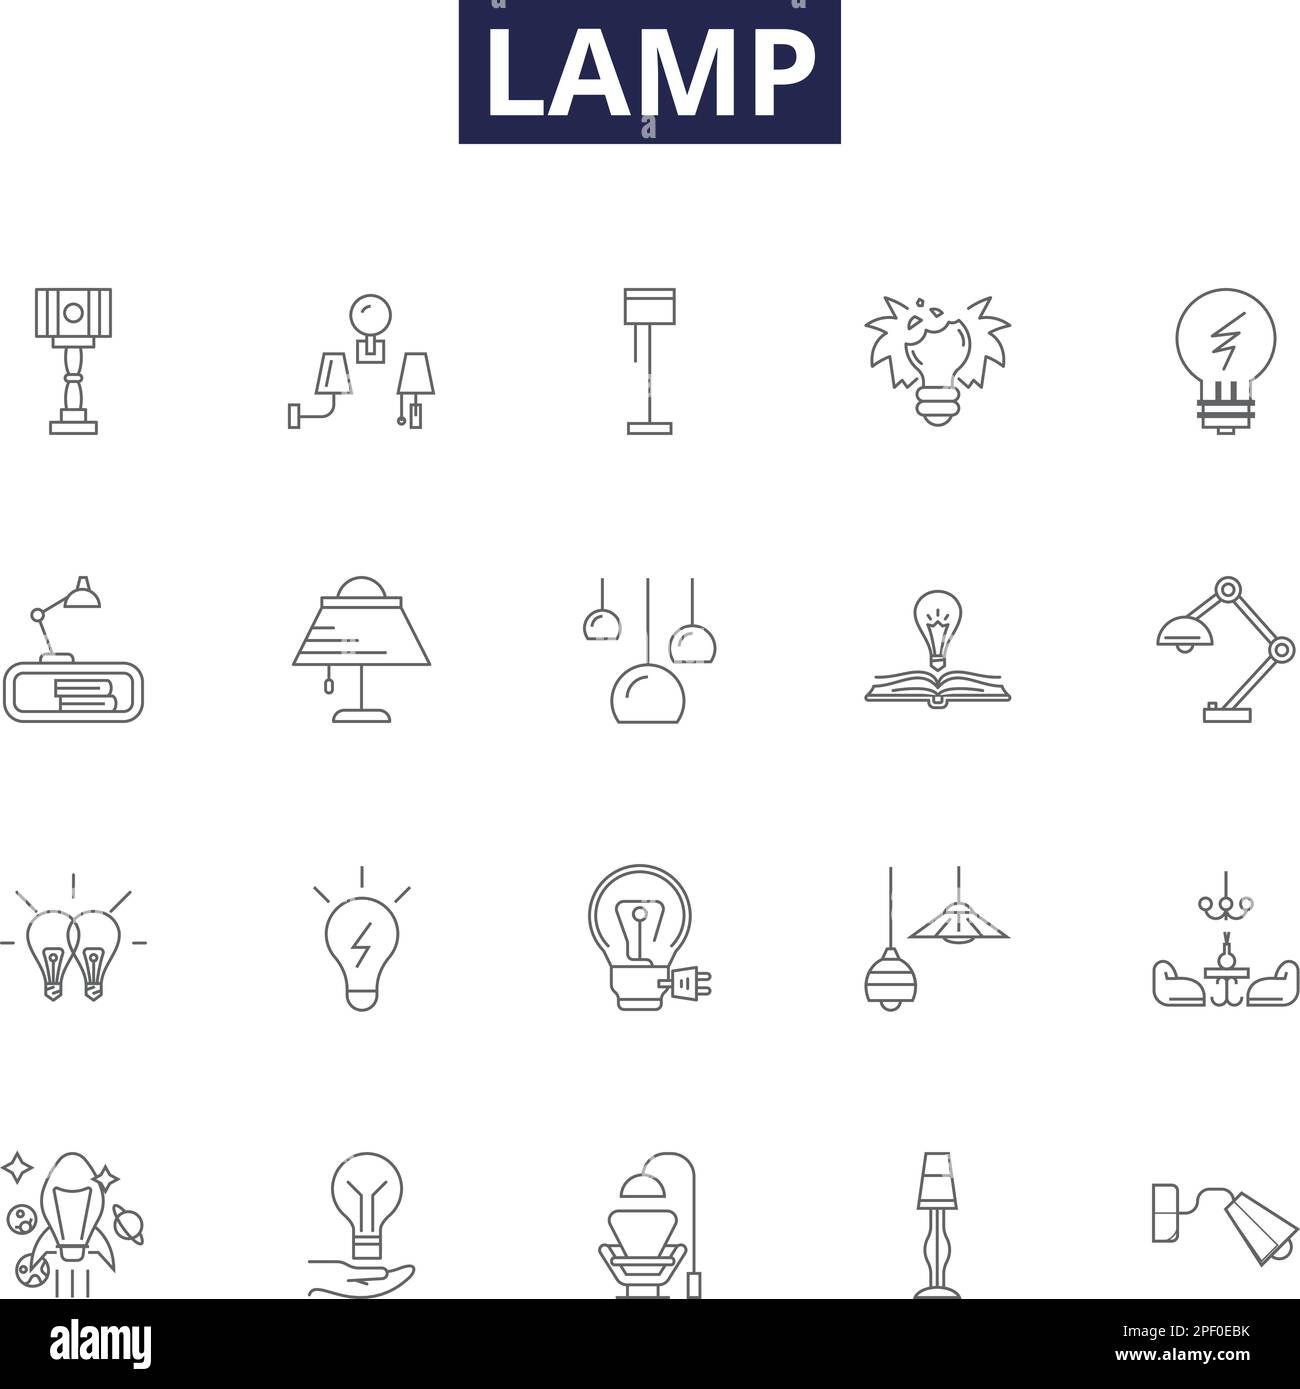 Lamp line vector icons and signs. Bulb, Table, Desk, Floor, Shade, Lampshade, Shade, Ceiling outline vector illustration set Stock Vector